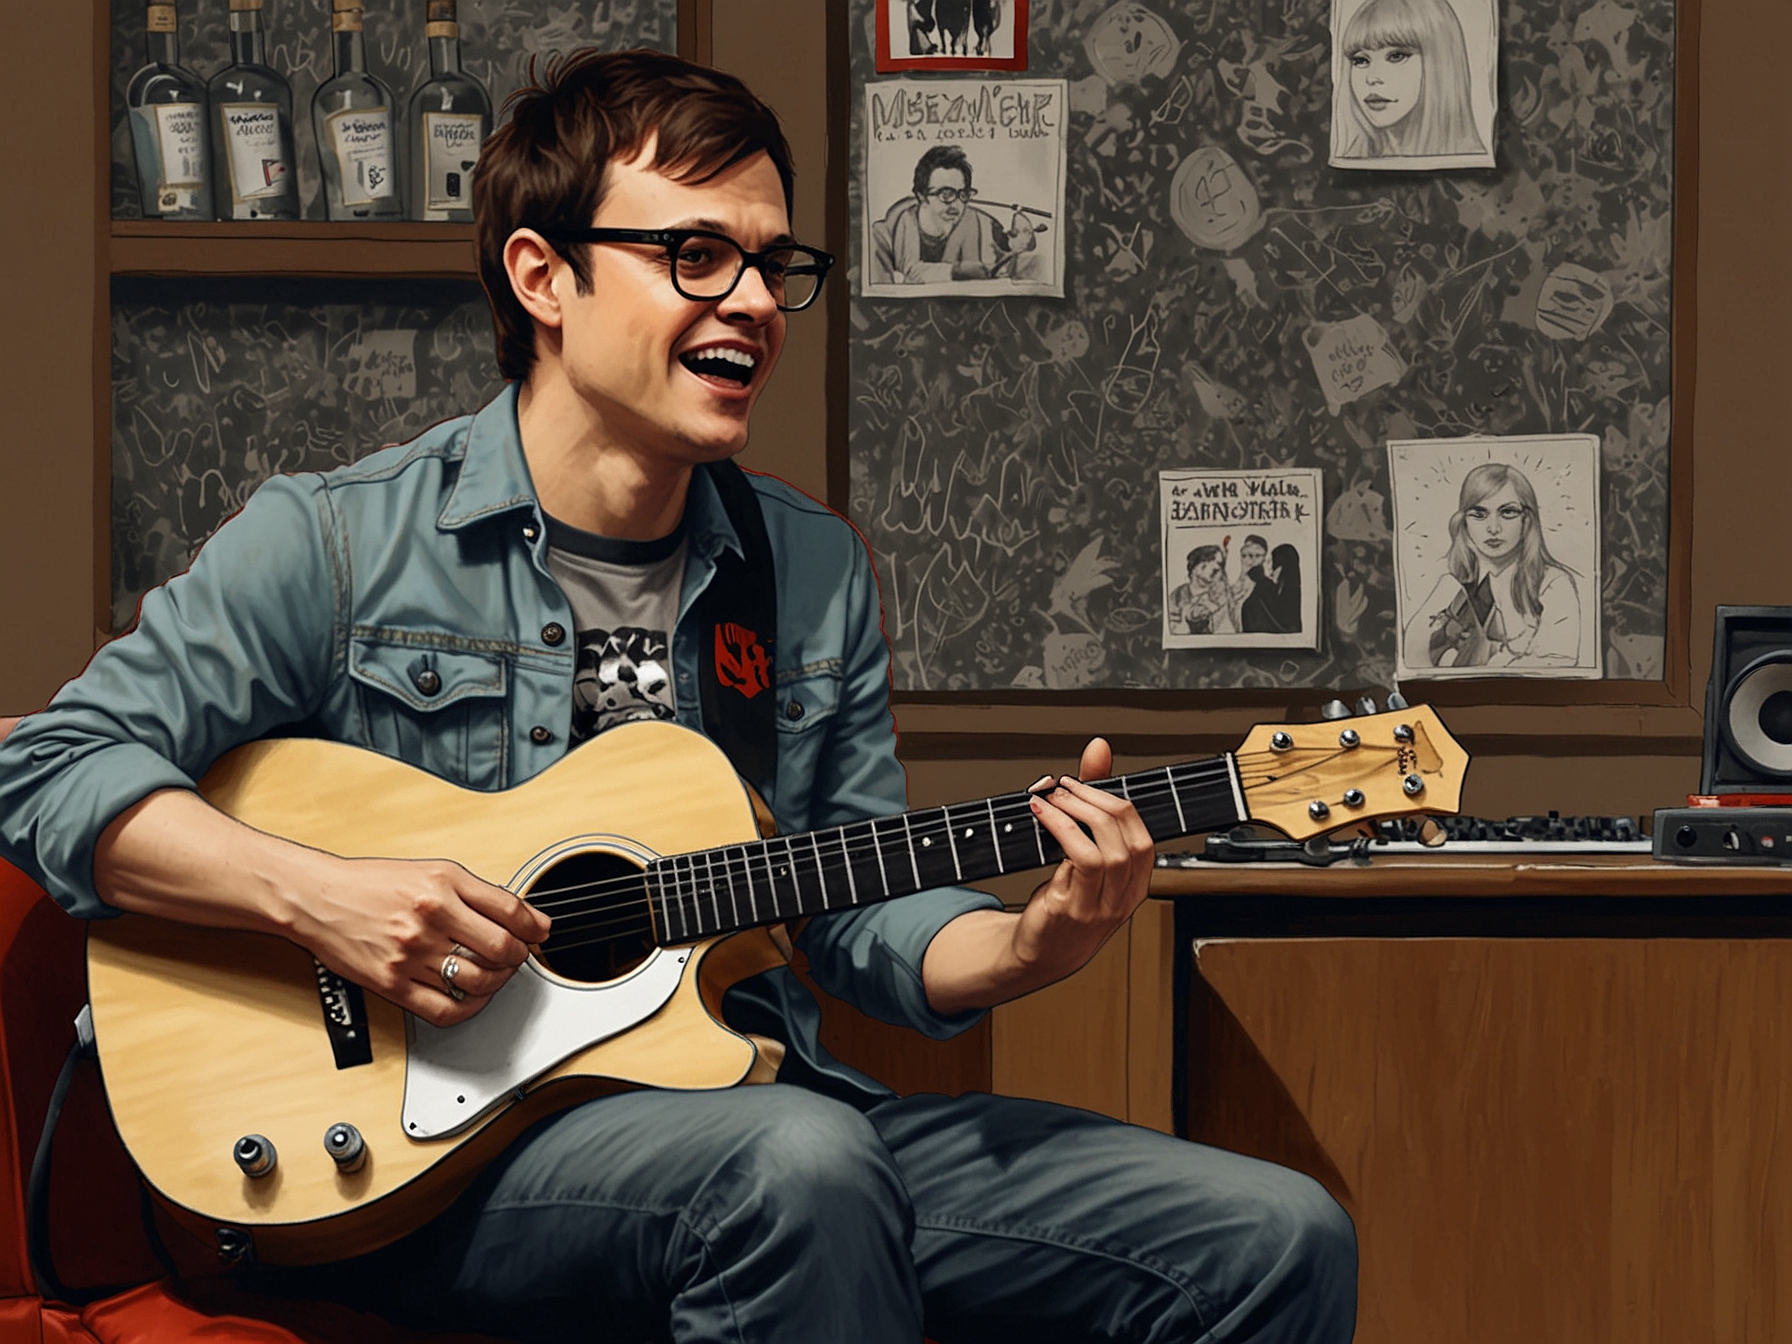 Rivers Cuomo of Weezer passionately discusses the potential for a rock album collaboration with Taylor Swift during an NME interview, emphasizing his admiration for her storytelling ability.